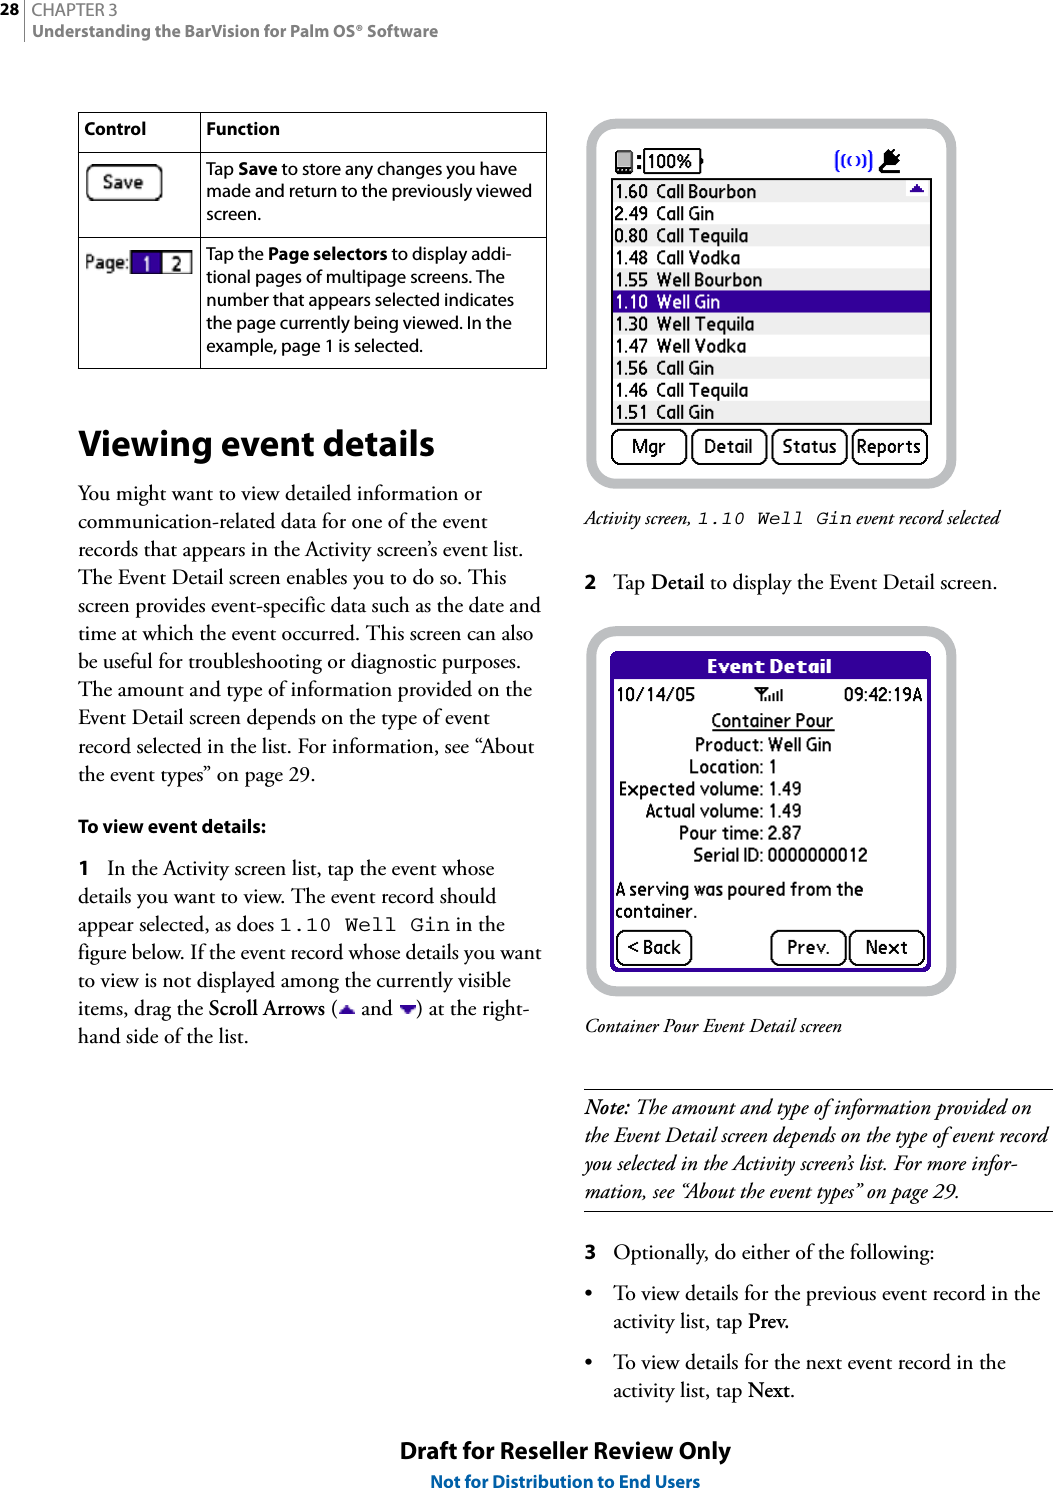 CHAPTER 328Understanding the BarVision for Palm OS® SoftwareDraft for Reseller Review OnlyNot for Distribution to End UsersViewing event detailsYou might want to view detailed information or communication-related data for one of the event records that appears in the Activity screen’s event list. The Event Detail screen enables you to do so. This screen provides event-specific data such as the date and time at which the event occurred. This screen can also be useful for troubleshooting or diagnostic purposes. The amount and type of information provided on the Event Detail screen depends on the type of event record selected in the list. For information, see “About the event types” on page 29.To view event details:1In the Activity screen list, tap the event whose details you want to view. The event record should appear selected, as does 1.10 Well Gin in the figure below. If the event record whose details you want to view is not displayed among the currently visible items, drag the Scroll Arrows ( and  ) at the right-hand side of the list.Activity screen, 1.10 Well Gin event record selected2Tap  Detail to display the Event Detail screen.Container Pour Event Detail screenNote: The amount and type of information provided on the Event Detail screen depends on the type of event record you selected in the Activity screen’s list. For more infor-mation, see “About the event types” on page 29.3Optionally, do either of the following:• To view details for the previous event record in the activity list, tap Prev.• To view details for the next event record in the activity list, tap Next.Tap Save to store any changes you have made and return to the previously viewed screen.Tap the Page selectors to display addi-tional pages of multipage screens. The number that appears selected indicates the page currently being viewed. In the example, page 1 is selected.Control Function